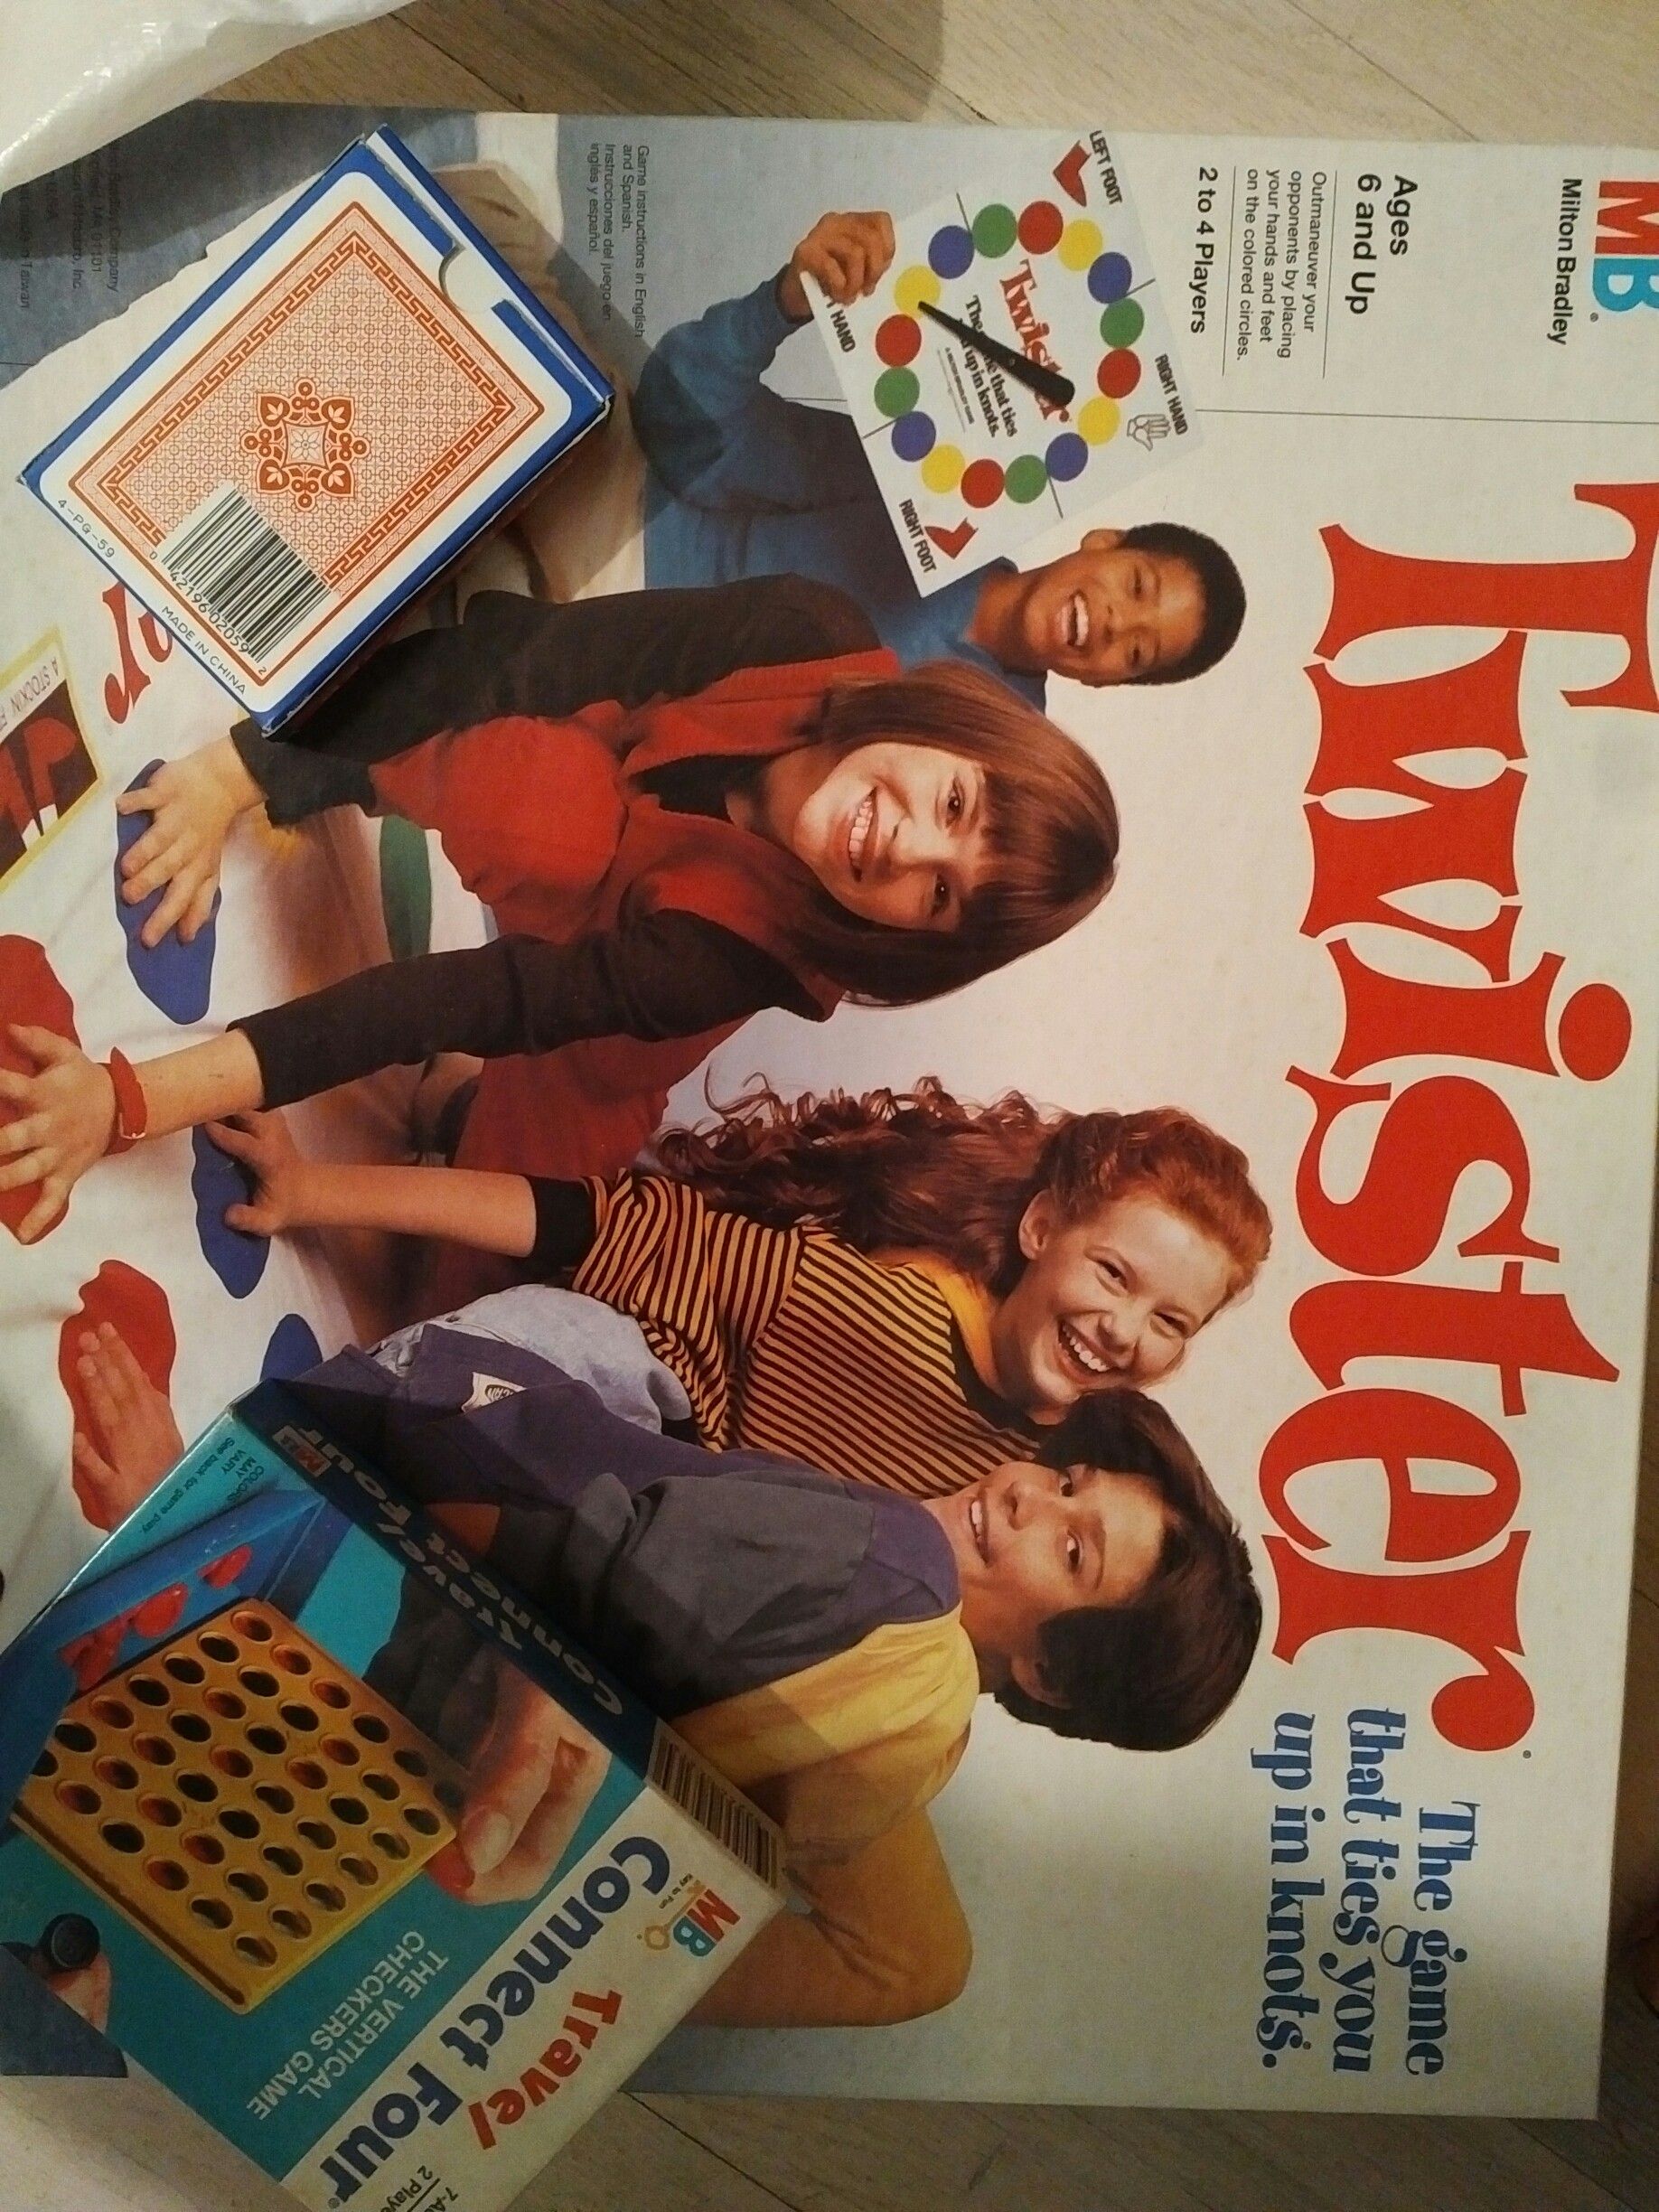 Twister game, travel size Connect Four, a deck of playing cards.